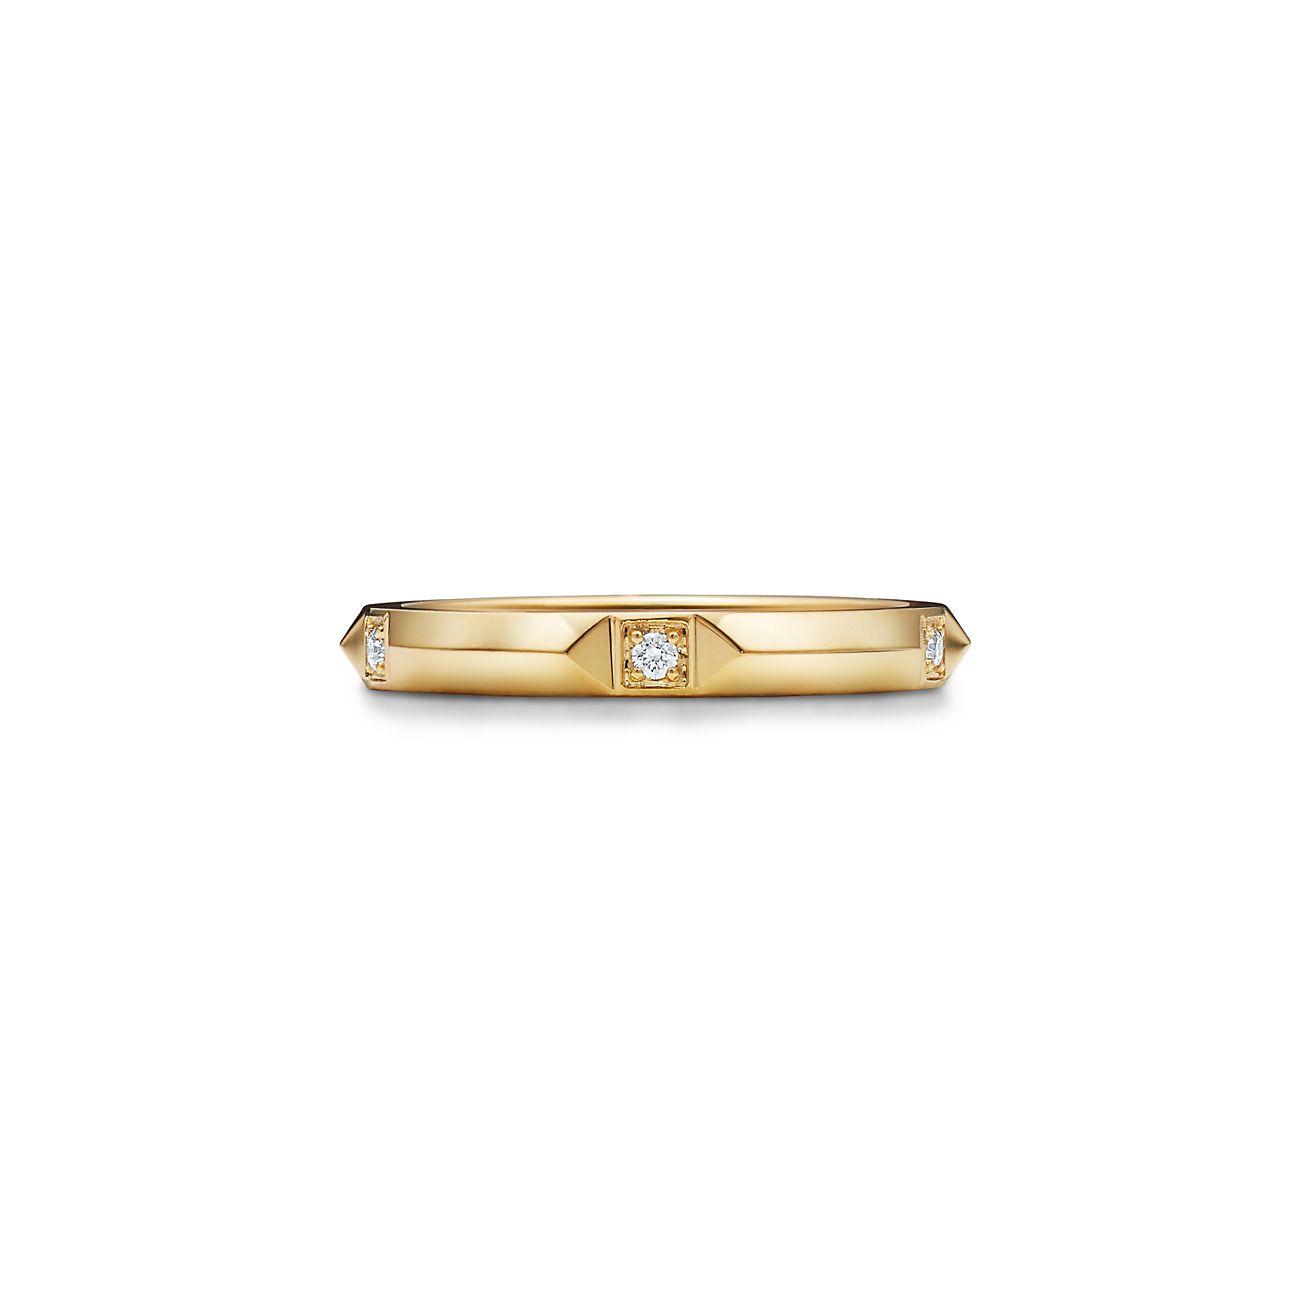 Tiffany True band ring in 18k gold with 